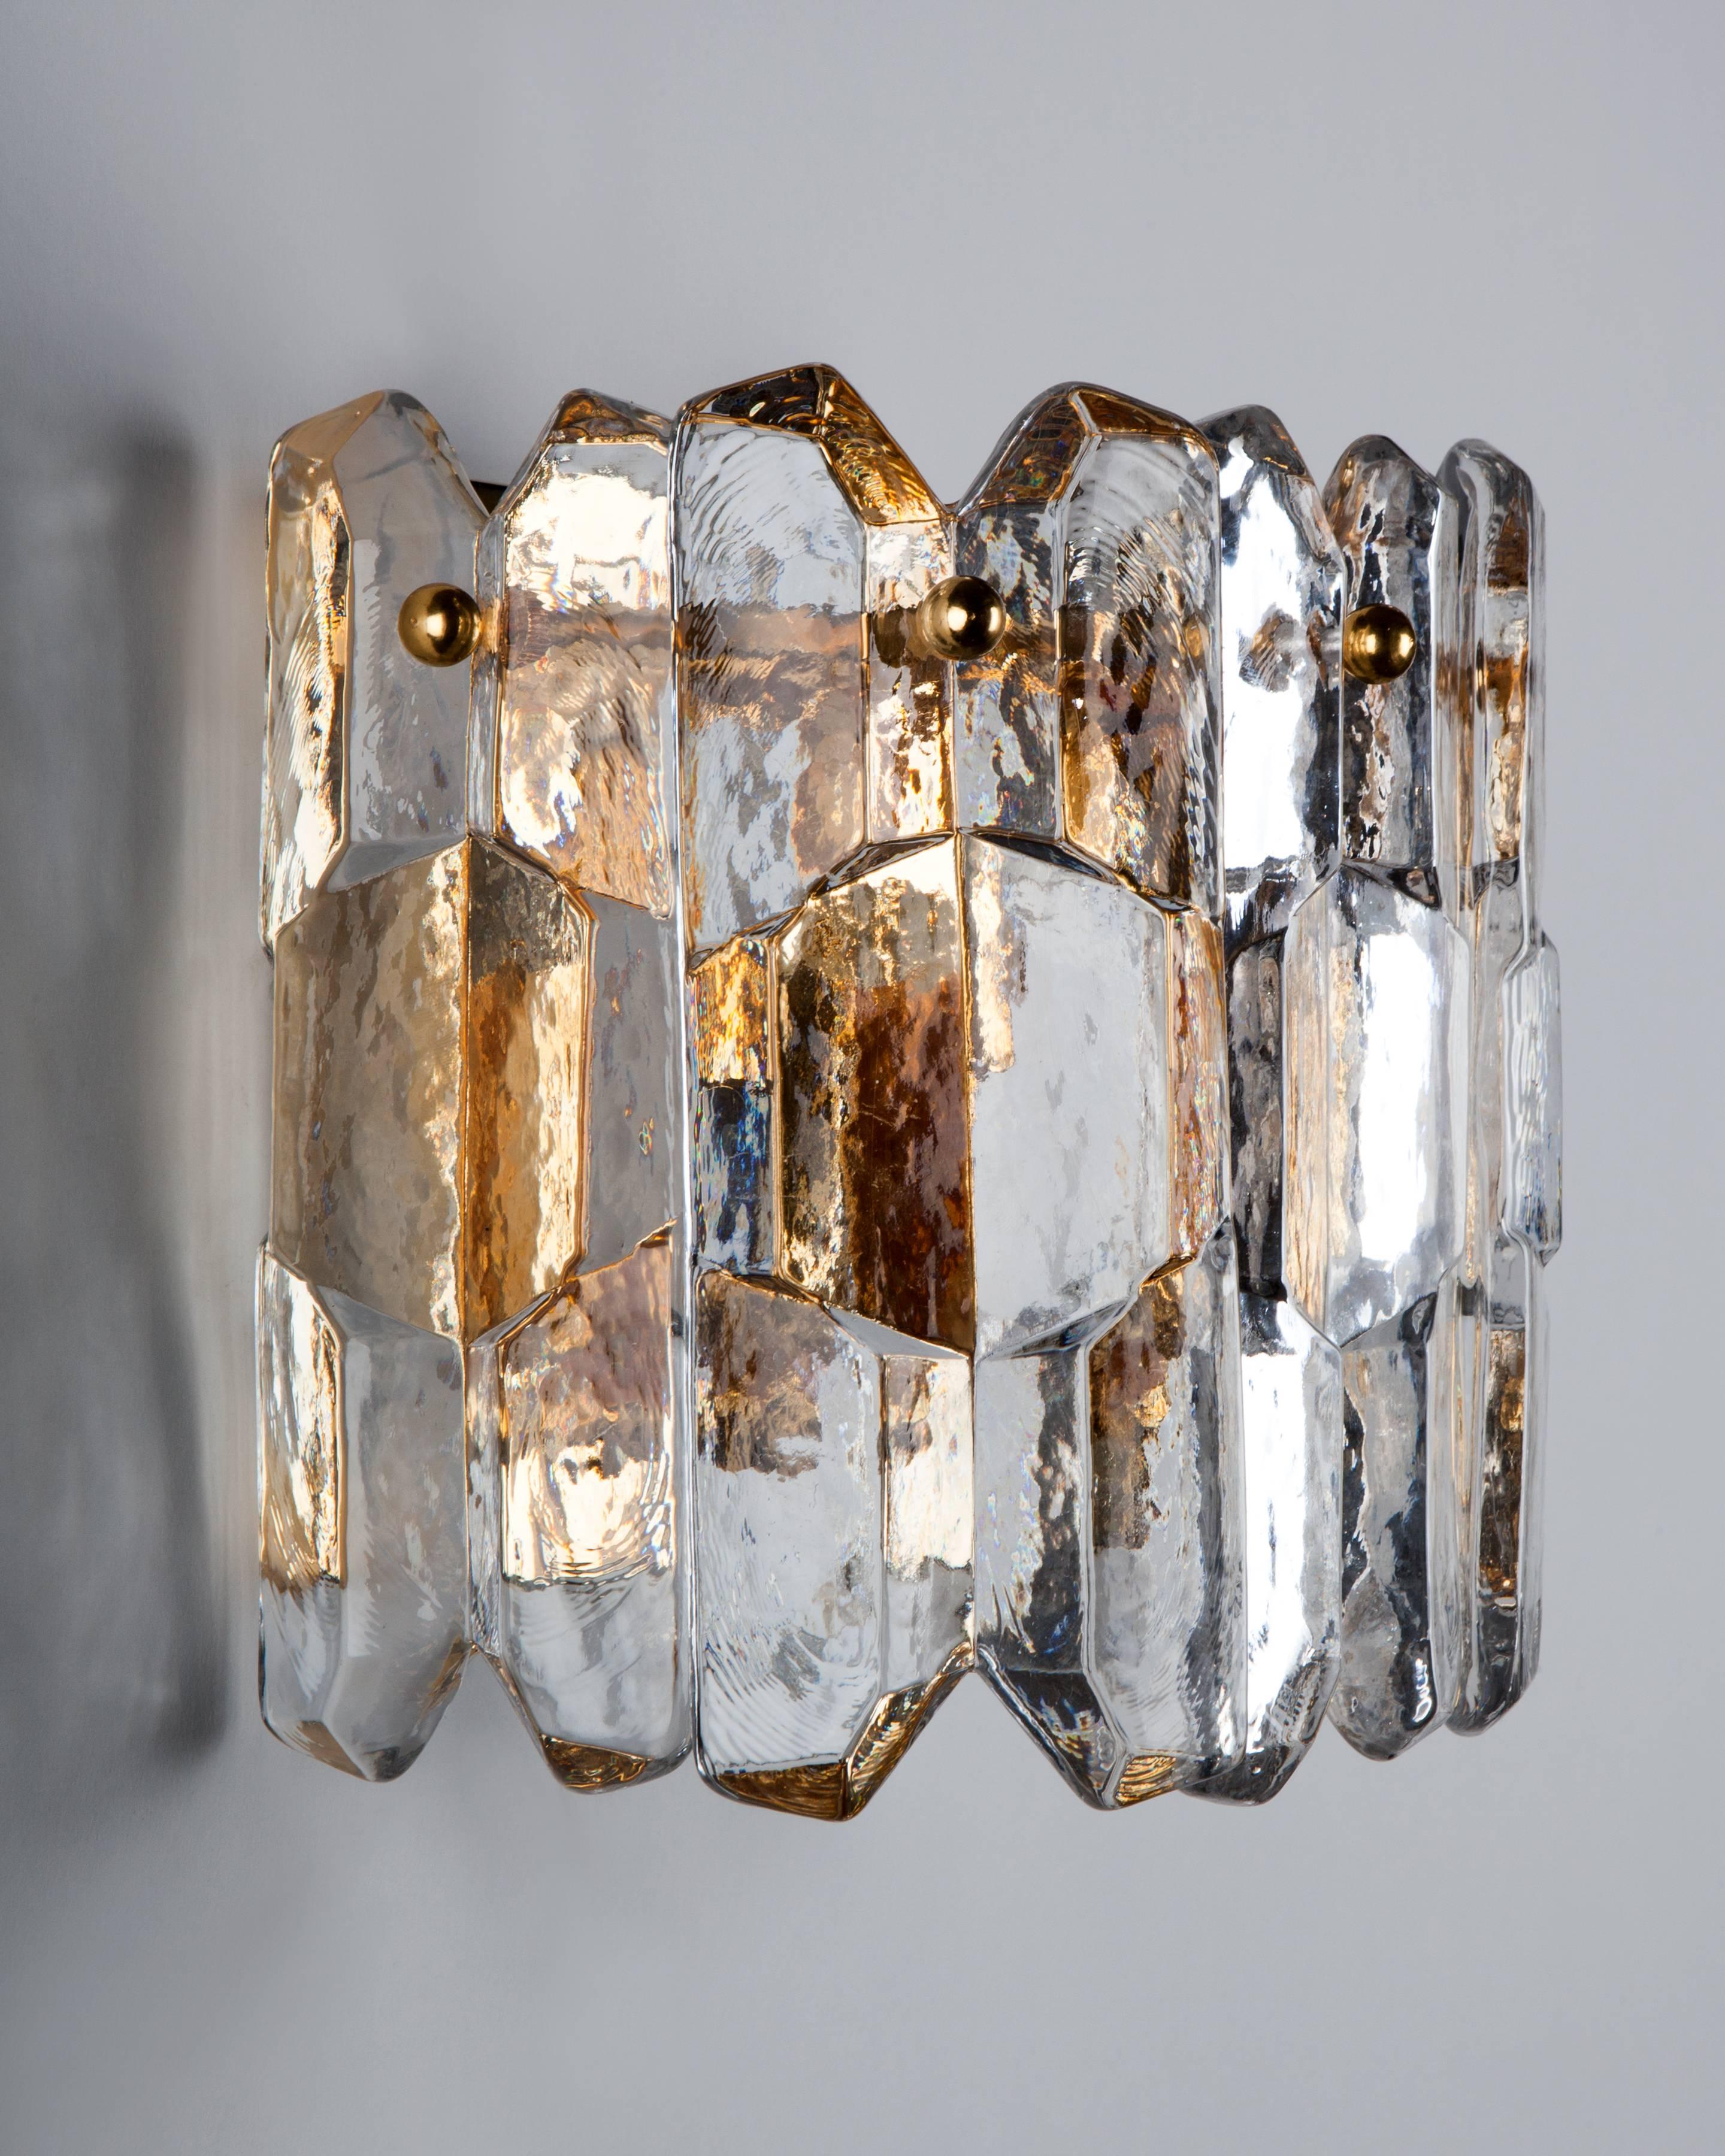 AIS3006

A vintage sconce with five thick cast glass ice style prisms held on a gilded metal frame. Designed by the Austrian maker Kalmar. Due to the antique nature of this fixture, there may be some nicks or imperfections in the glass as well as